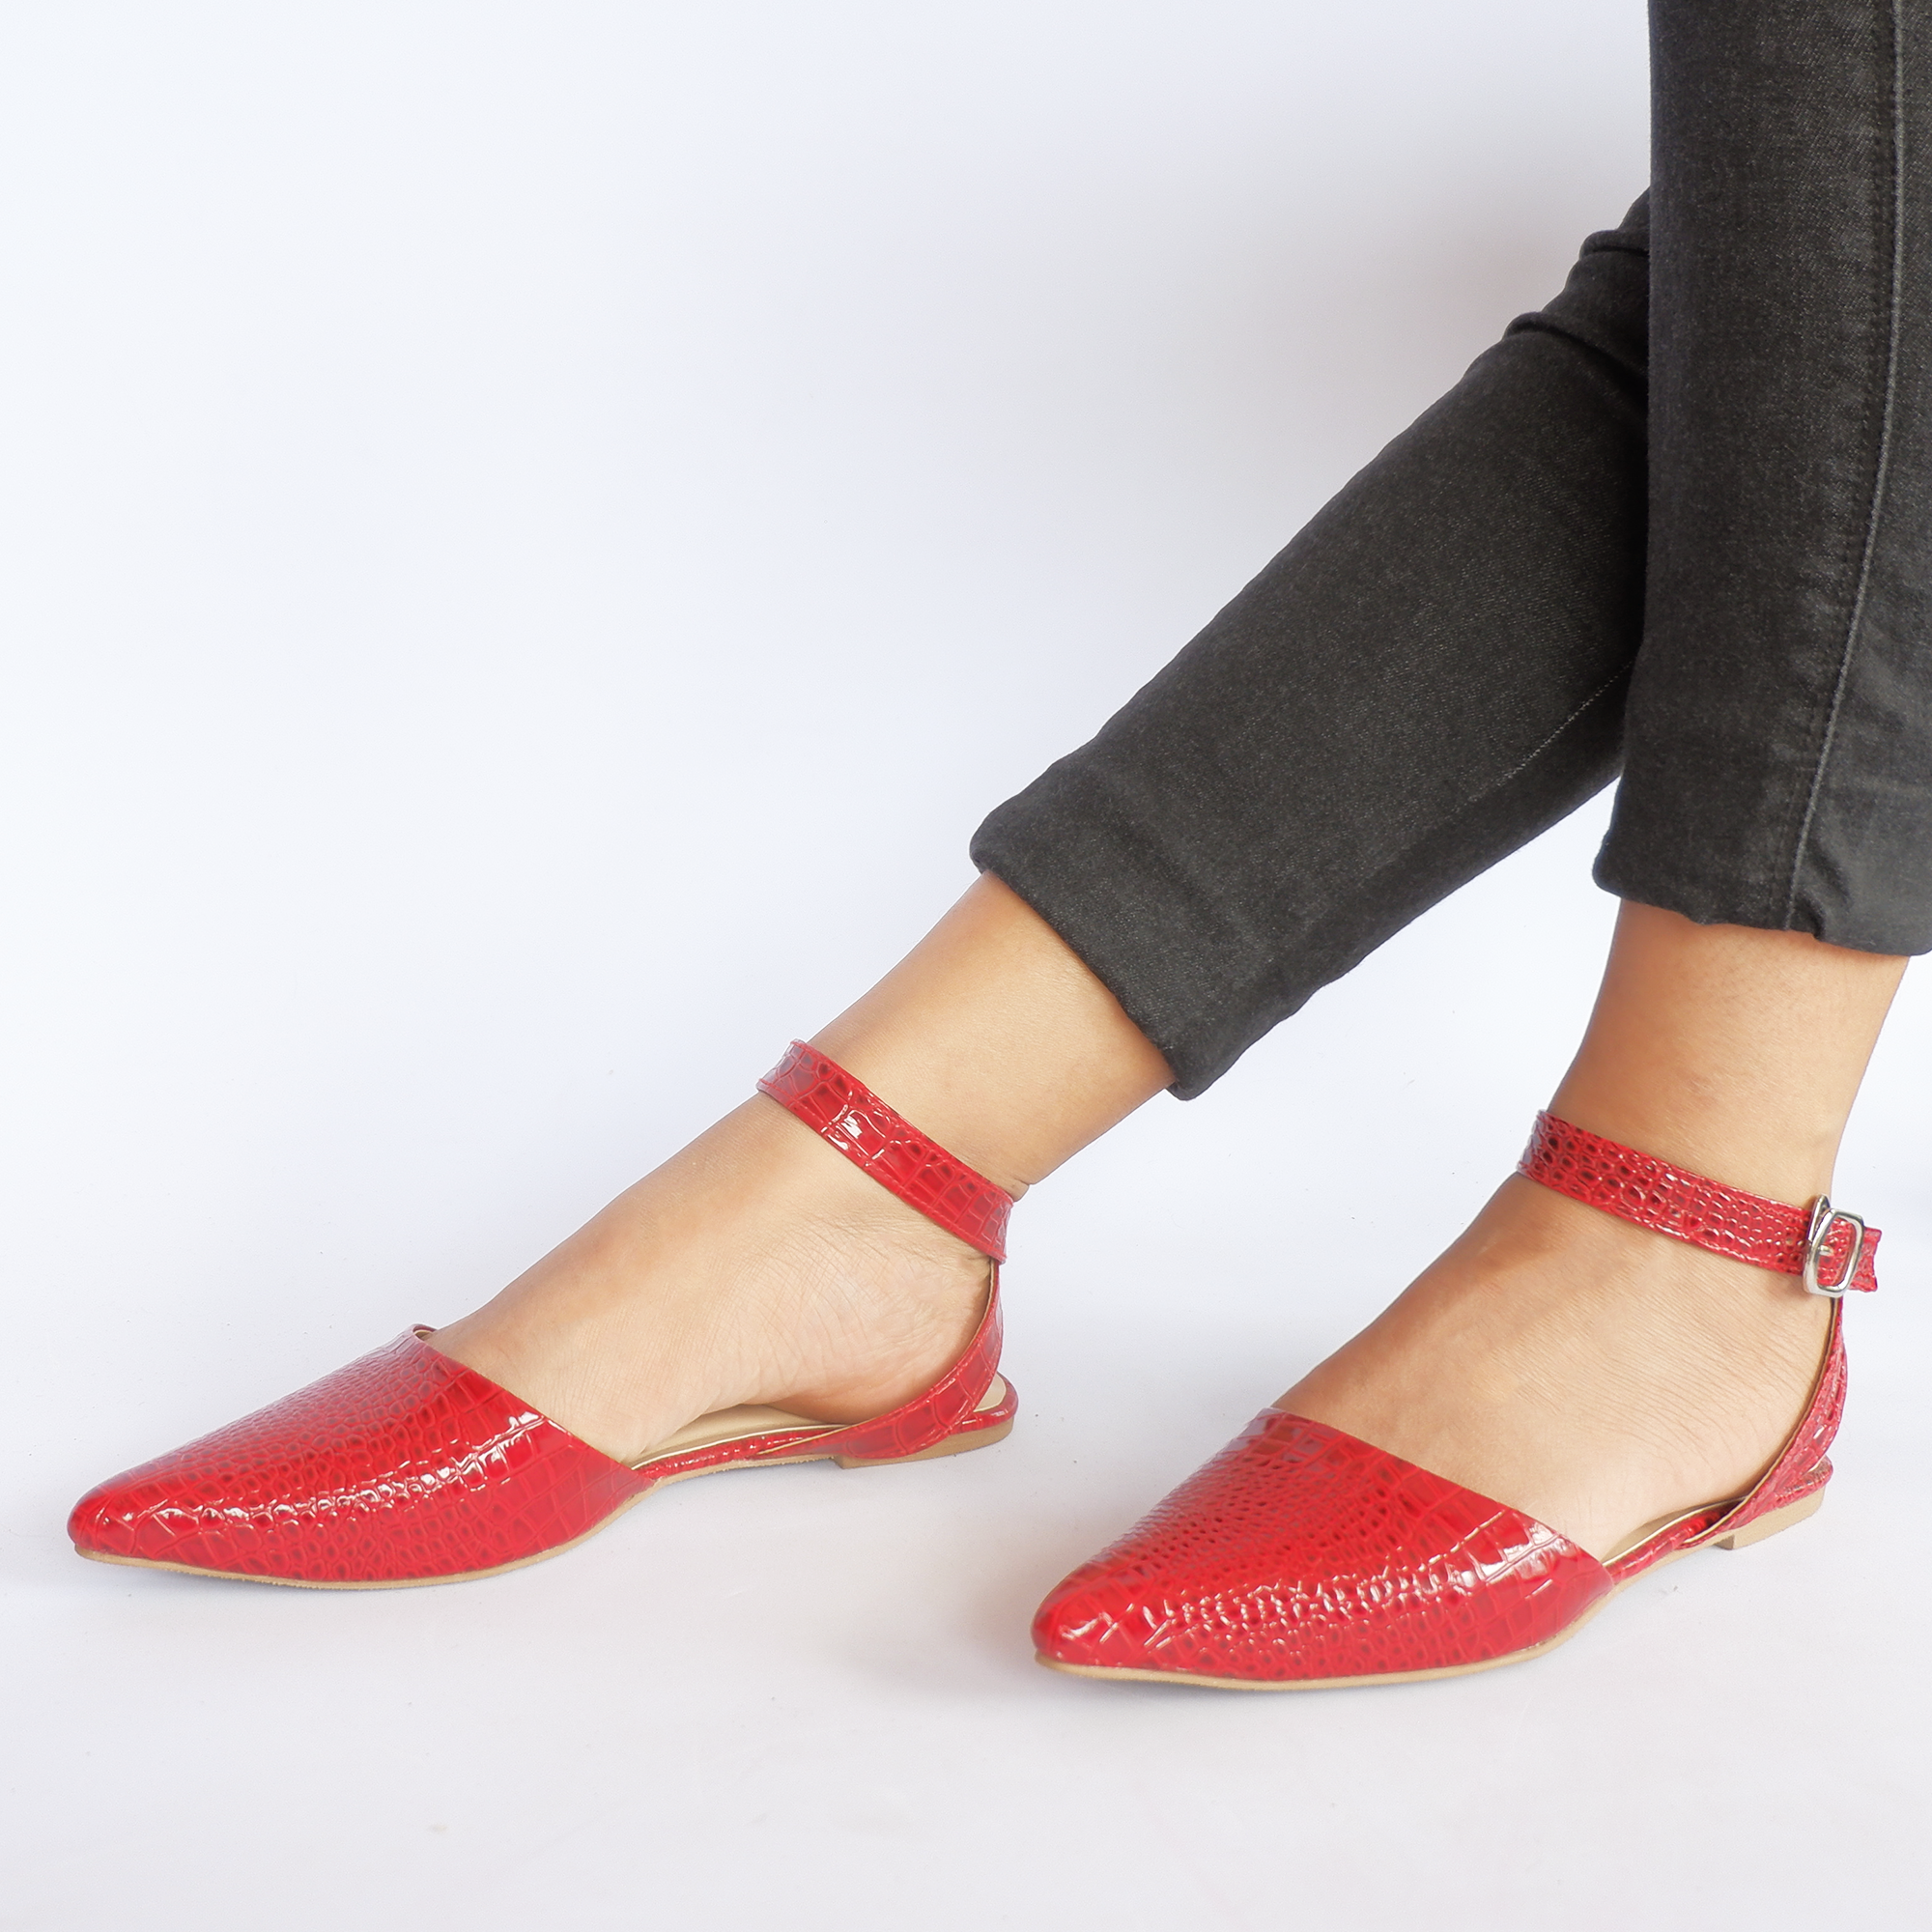 red suede pointed flats